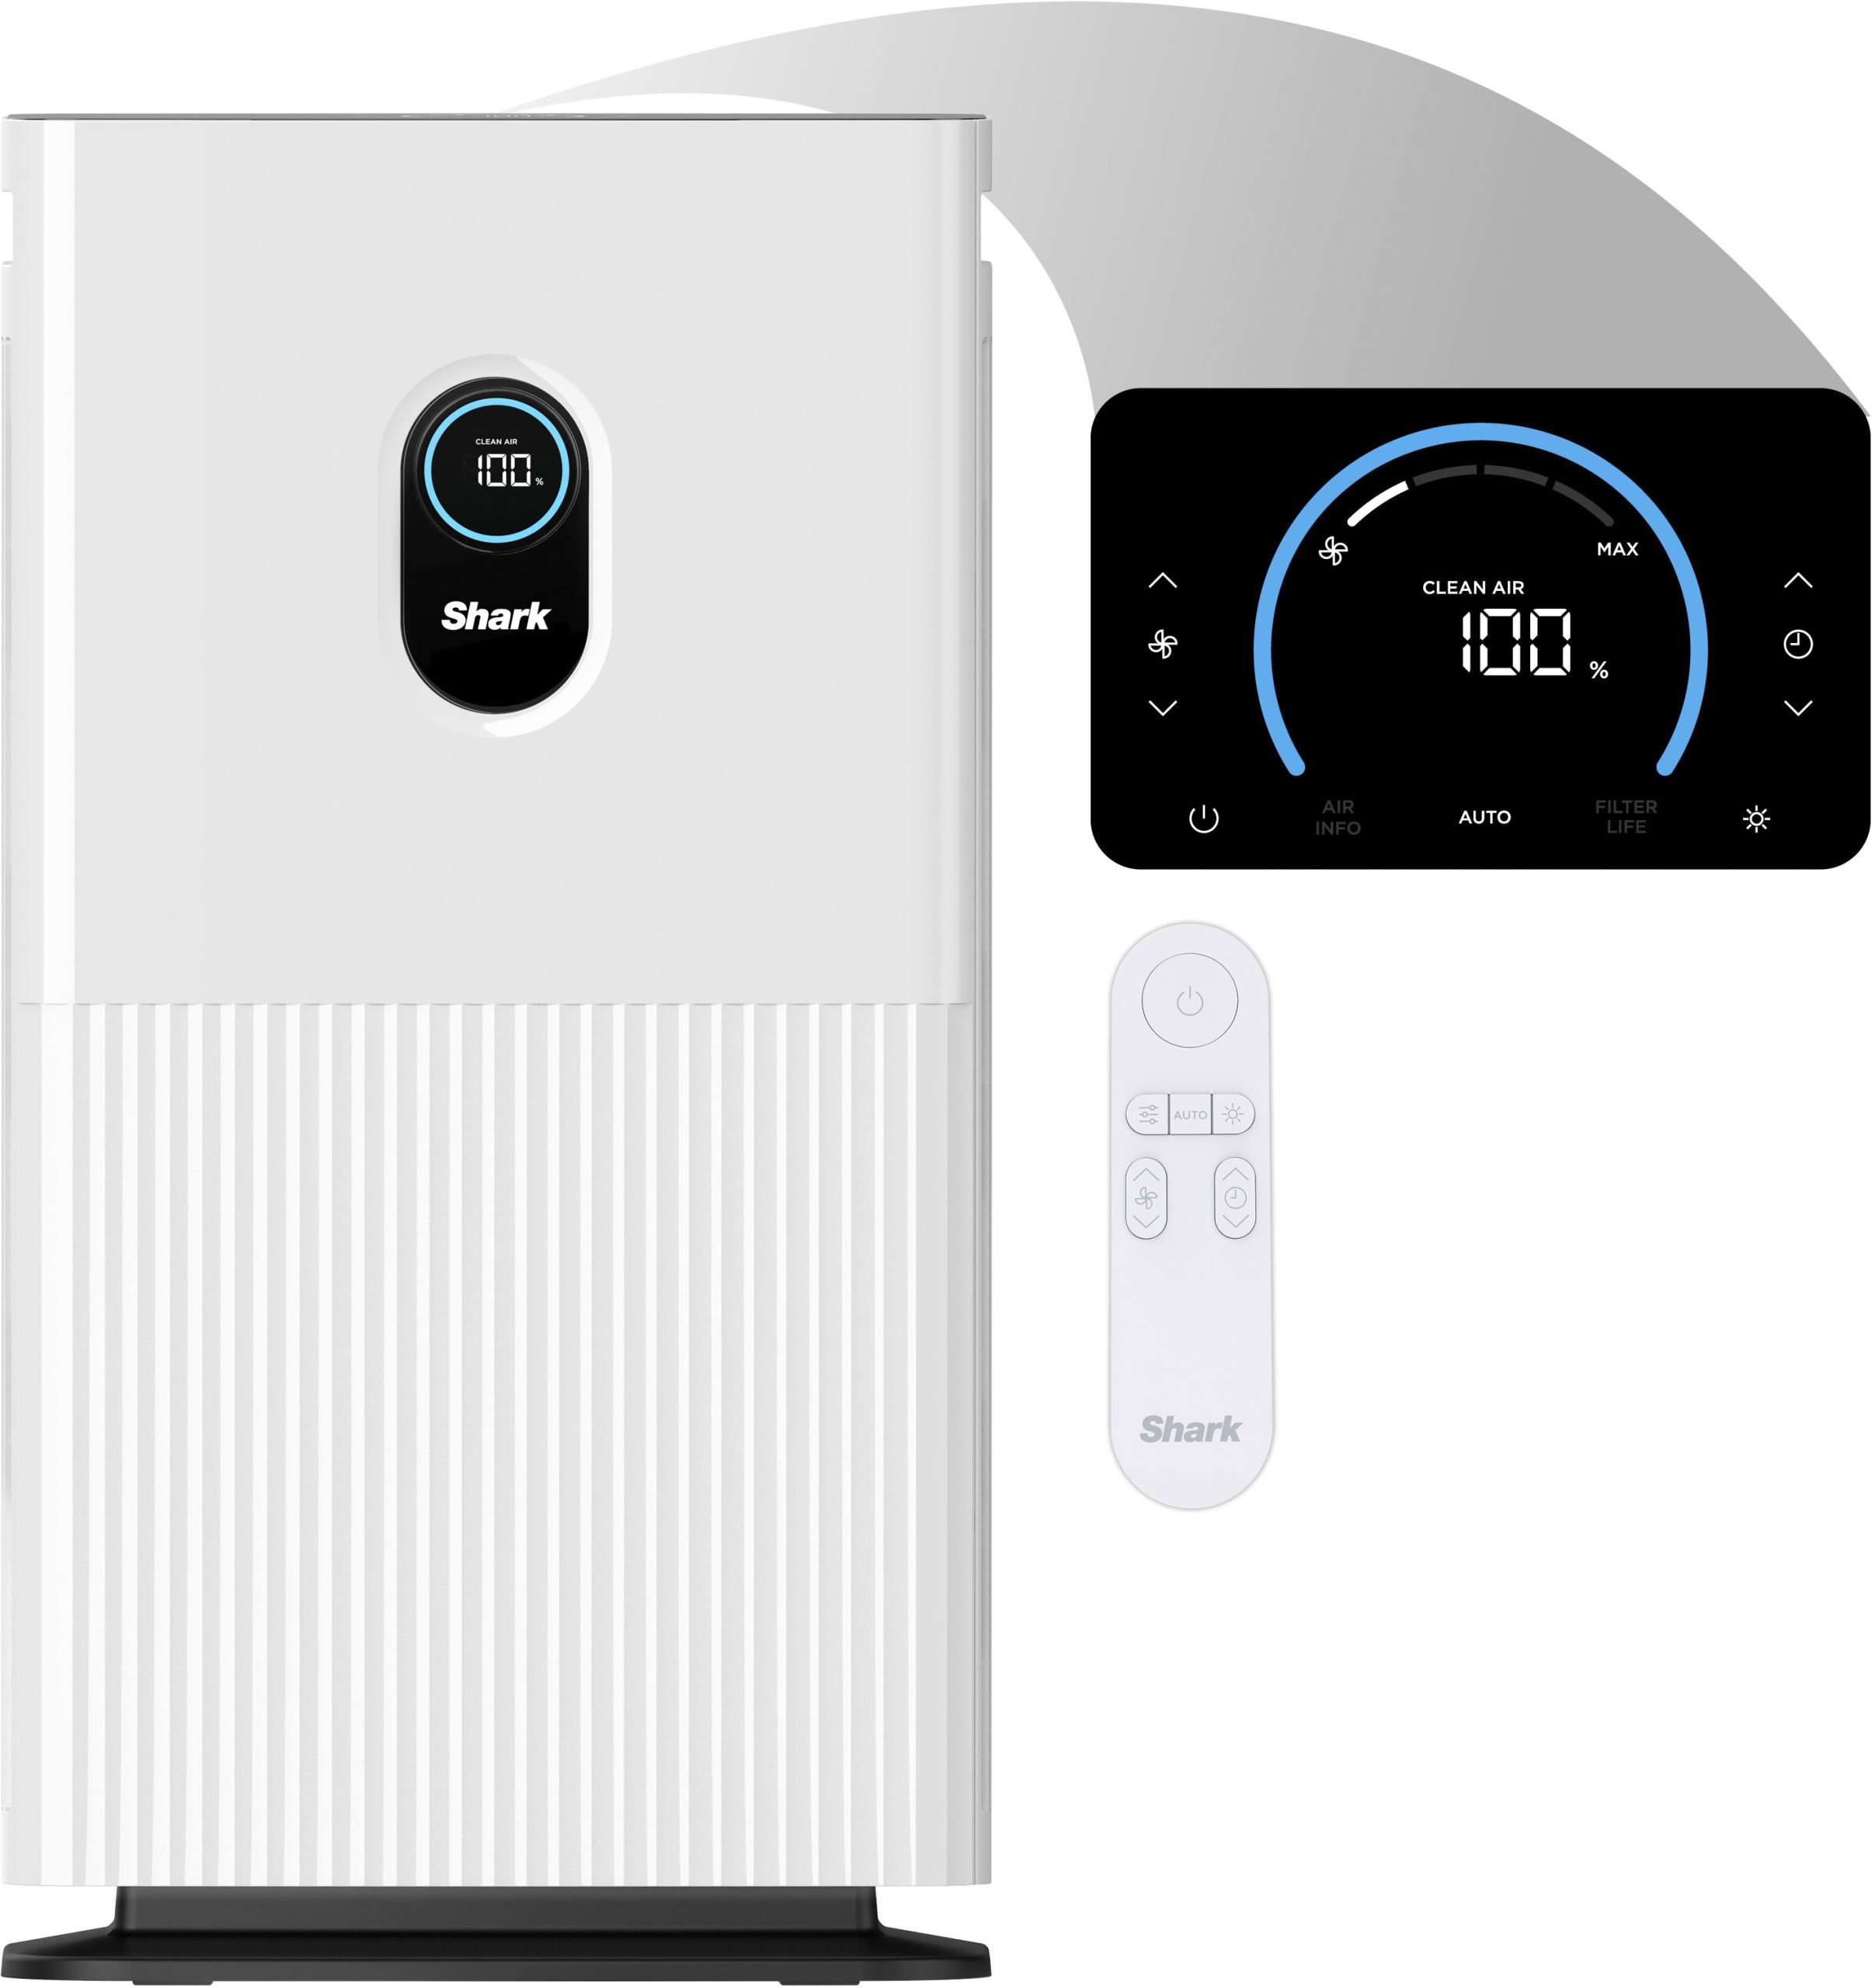 Shark – Air Purifier 6 With Anti-Allergen HEPA Filter – Just $229.99 at Best Buy